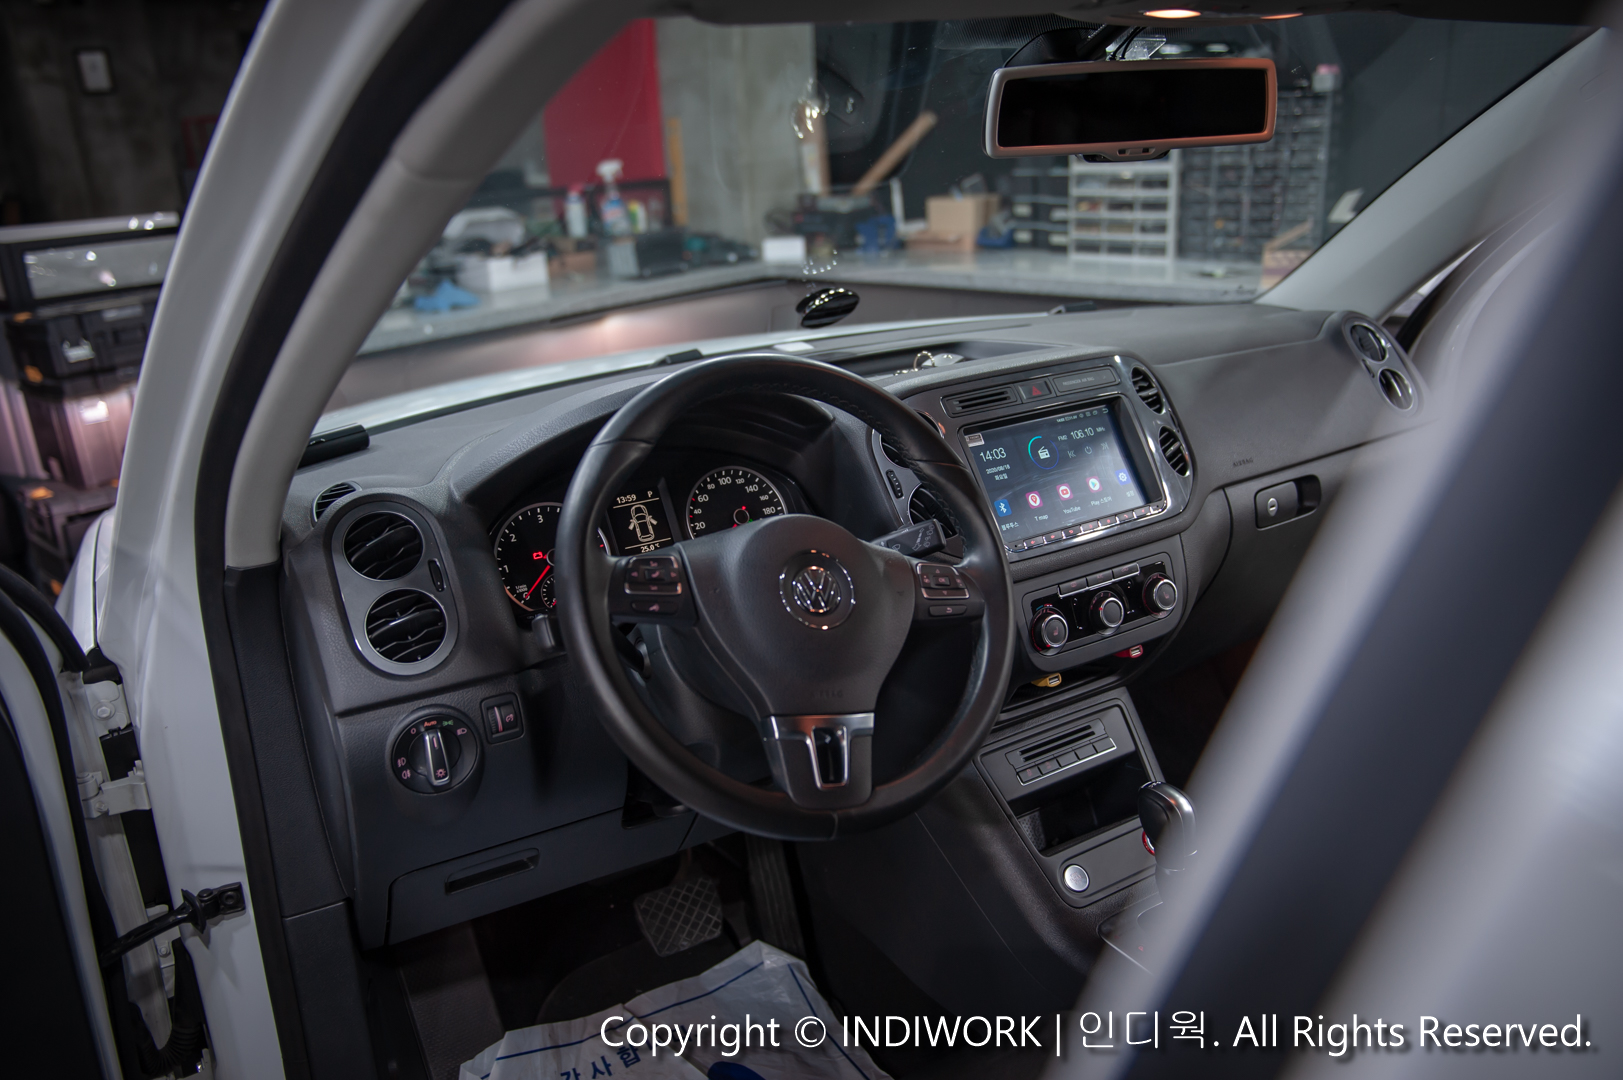 VW RCD310 to Android All in One (CarPC) 2015 Volkswagen Tiguan